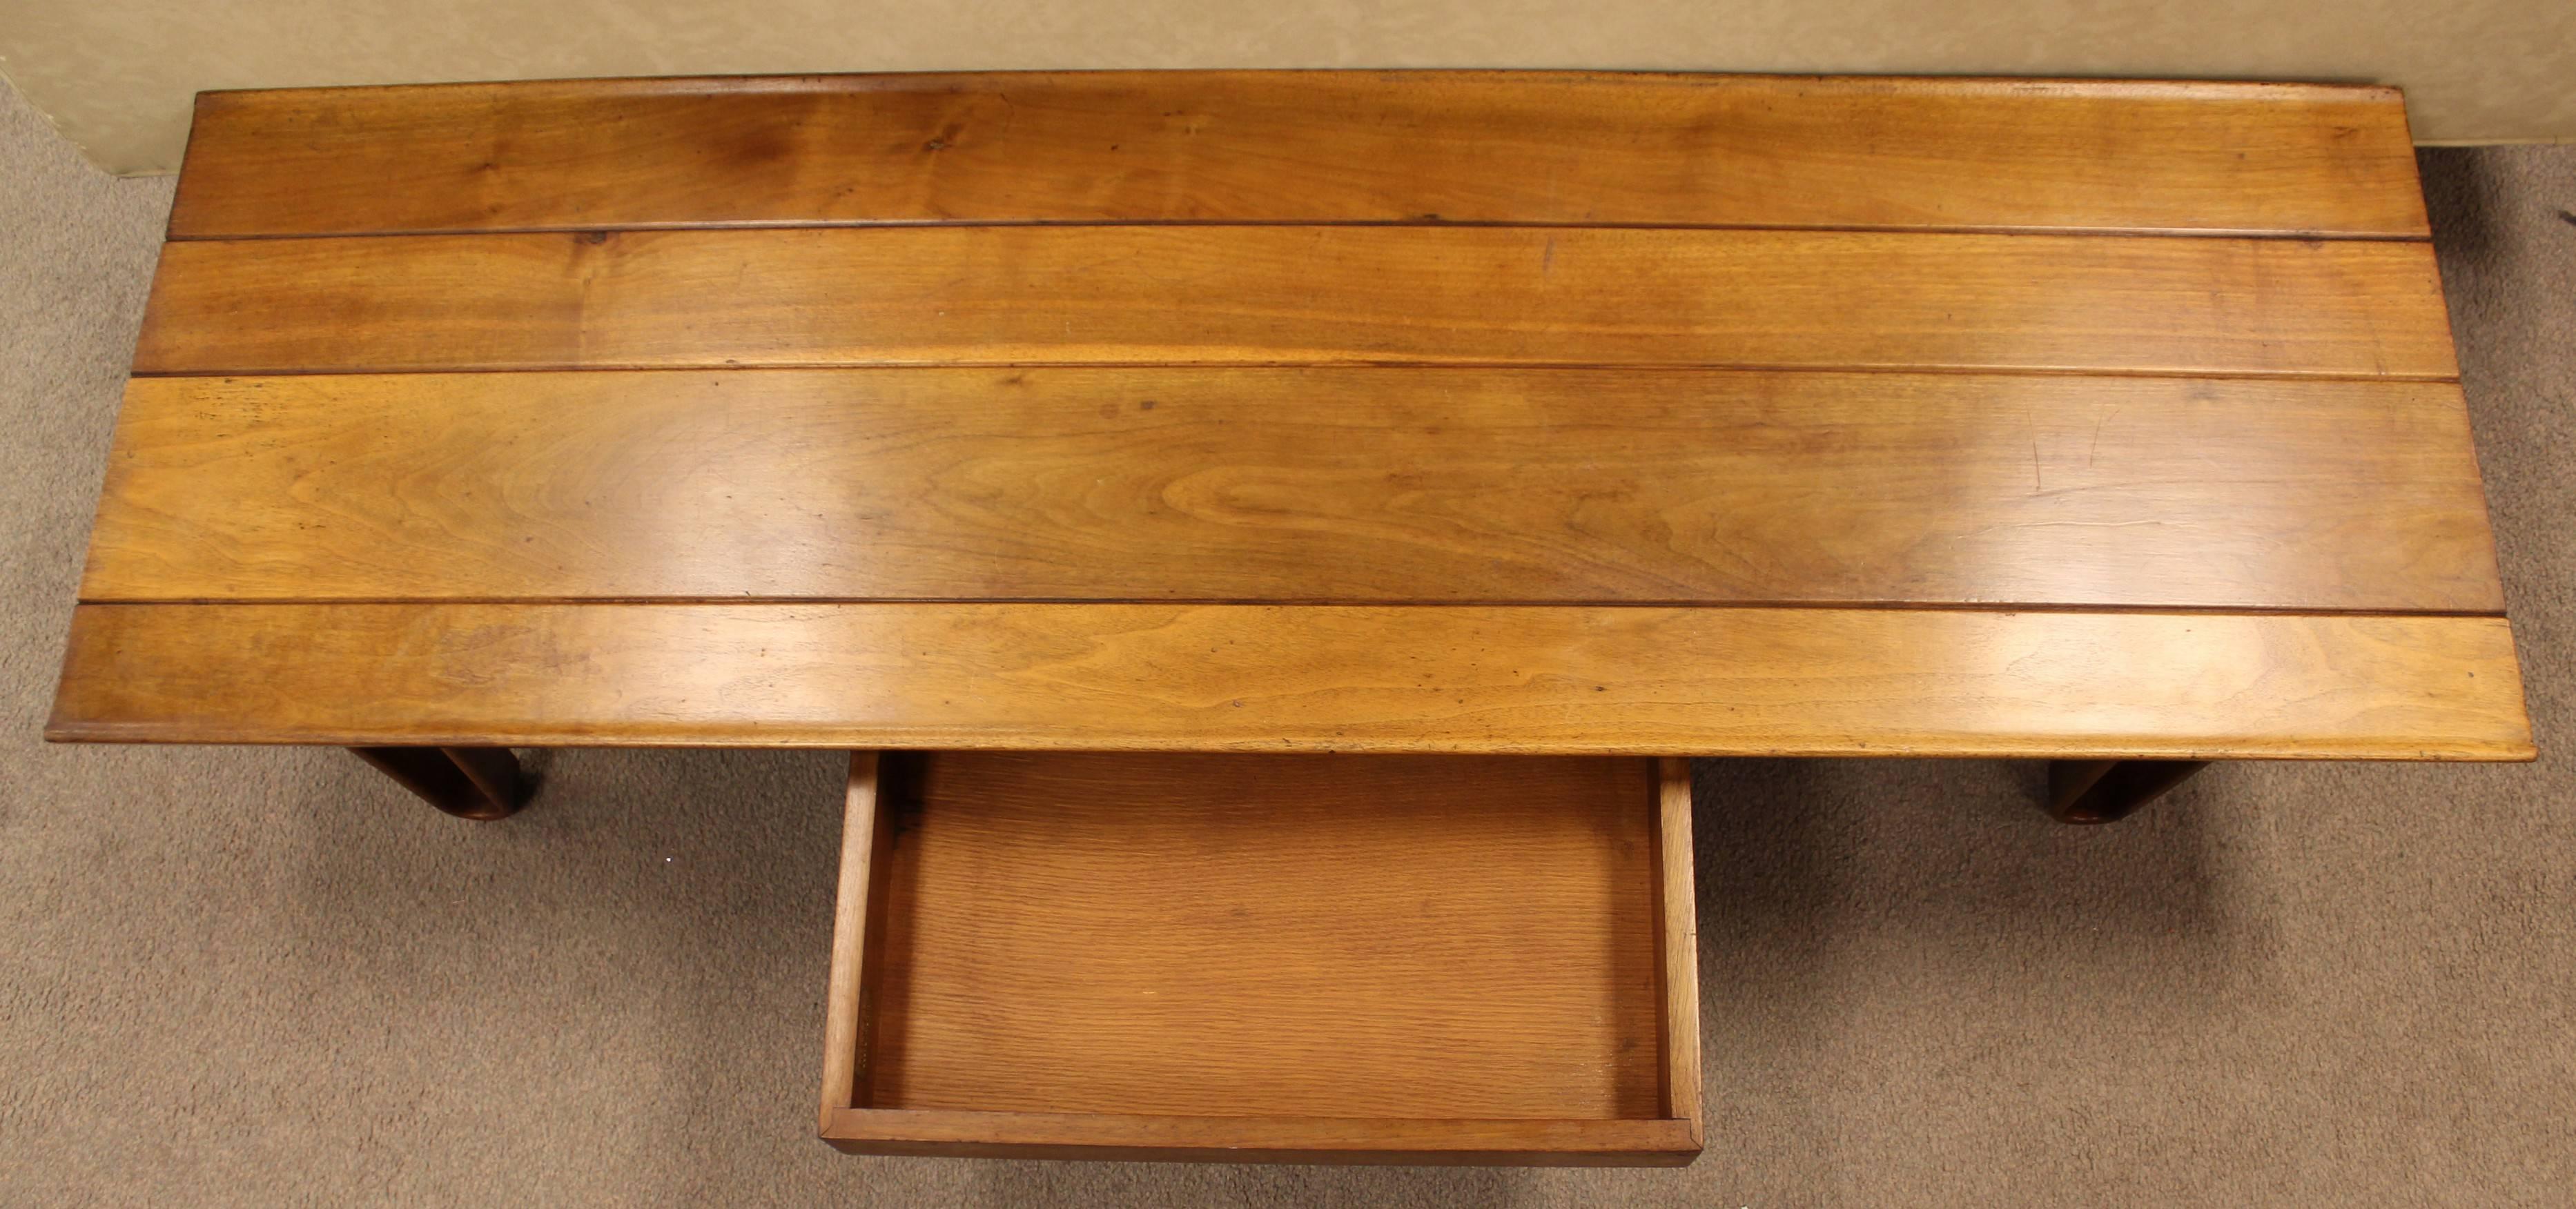 American Long John Bench or Coffee Table by Edward Wormley for Dunbar